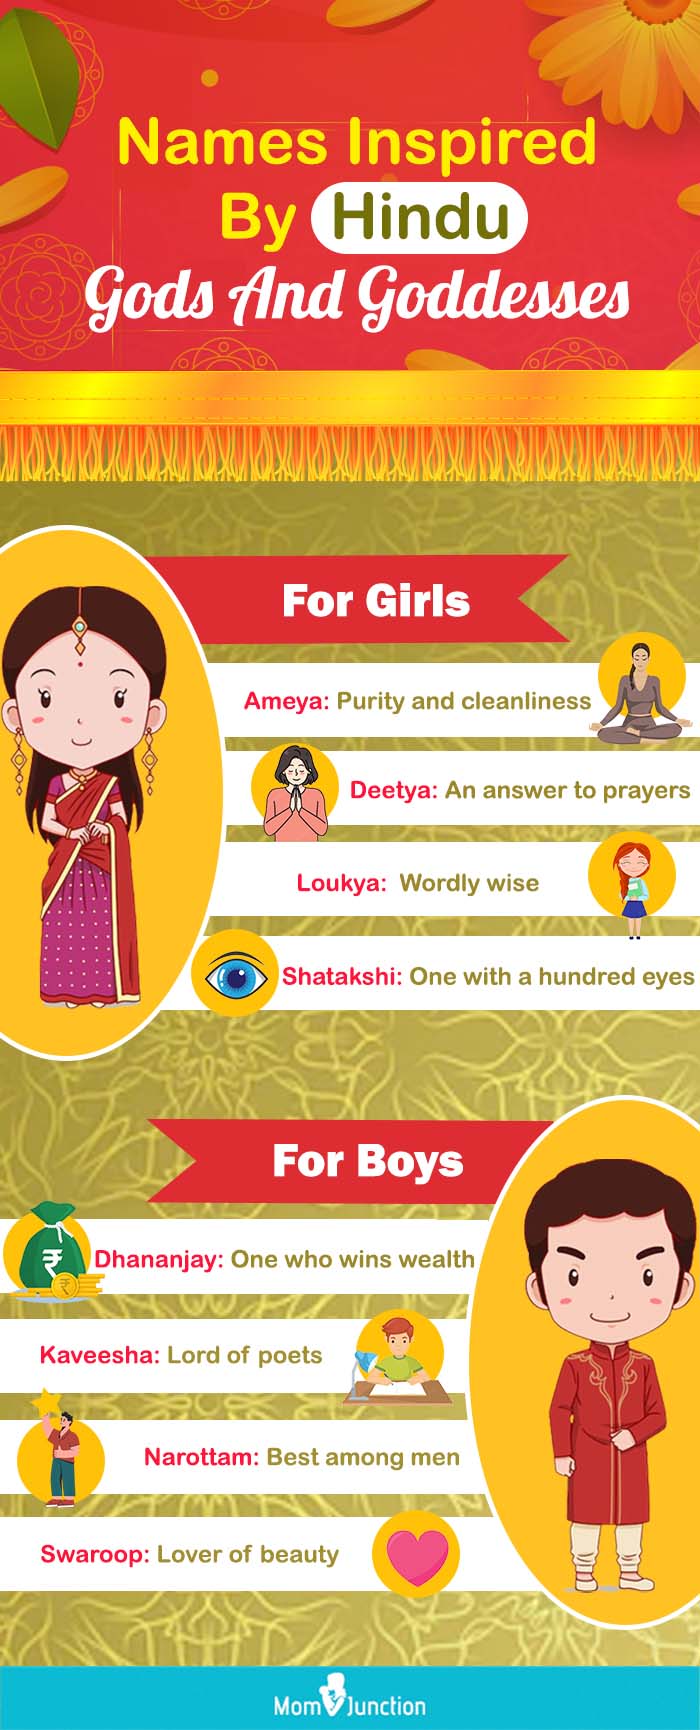 names inspired by hindu gods and goddesses [infographic]